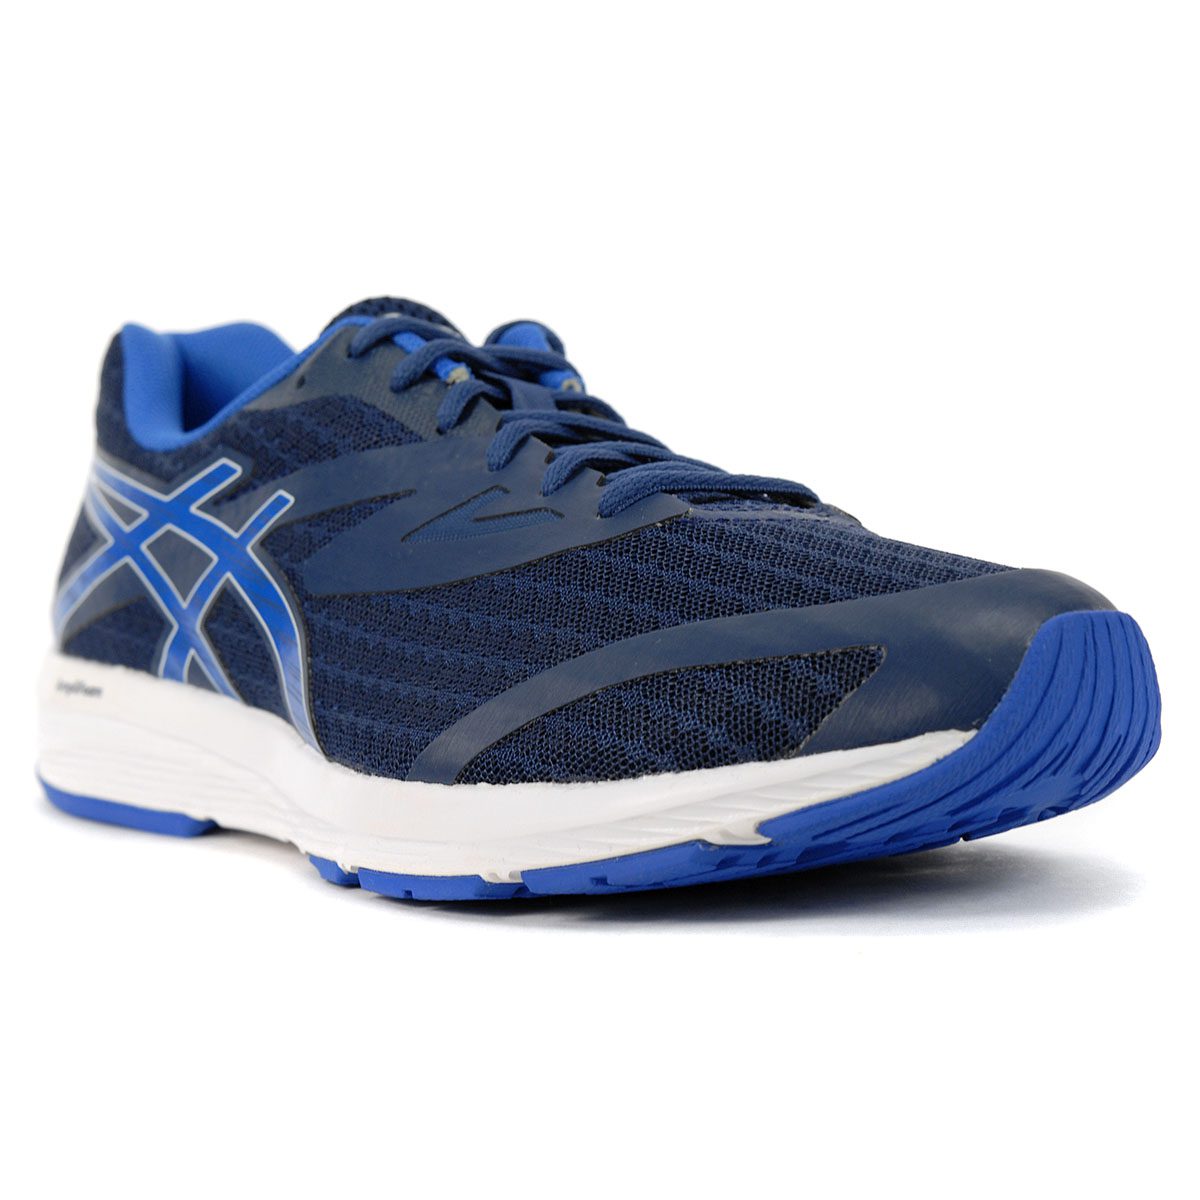 asics amplica t825n,Save up to 15%,www.ilcascinone.com